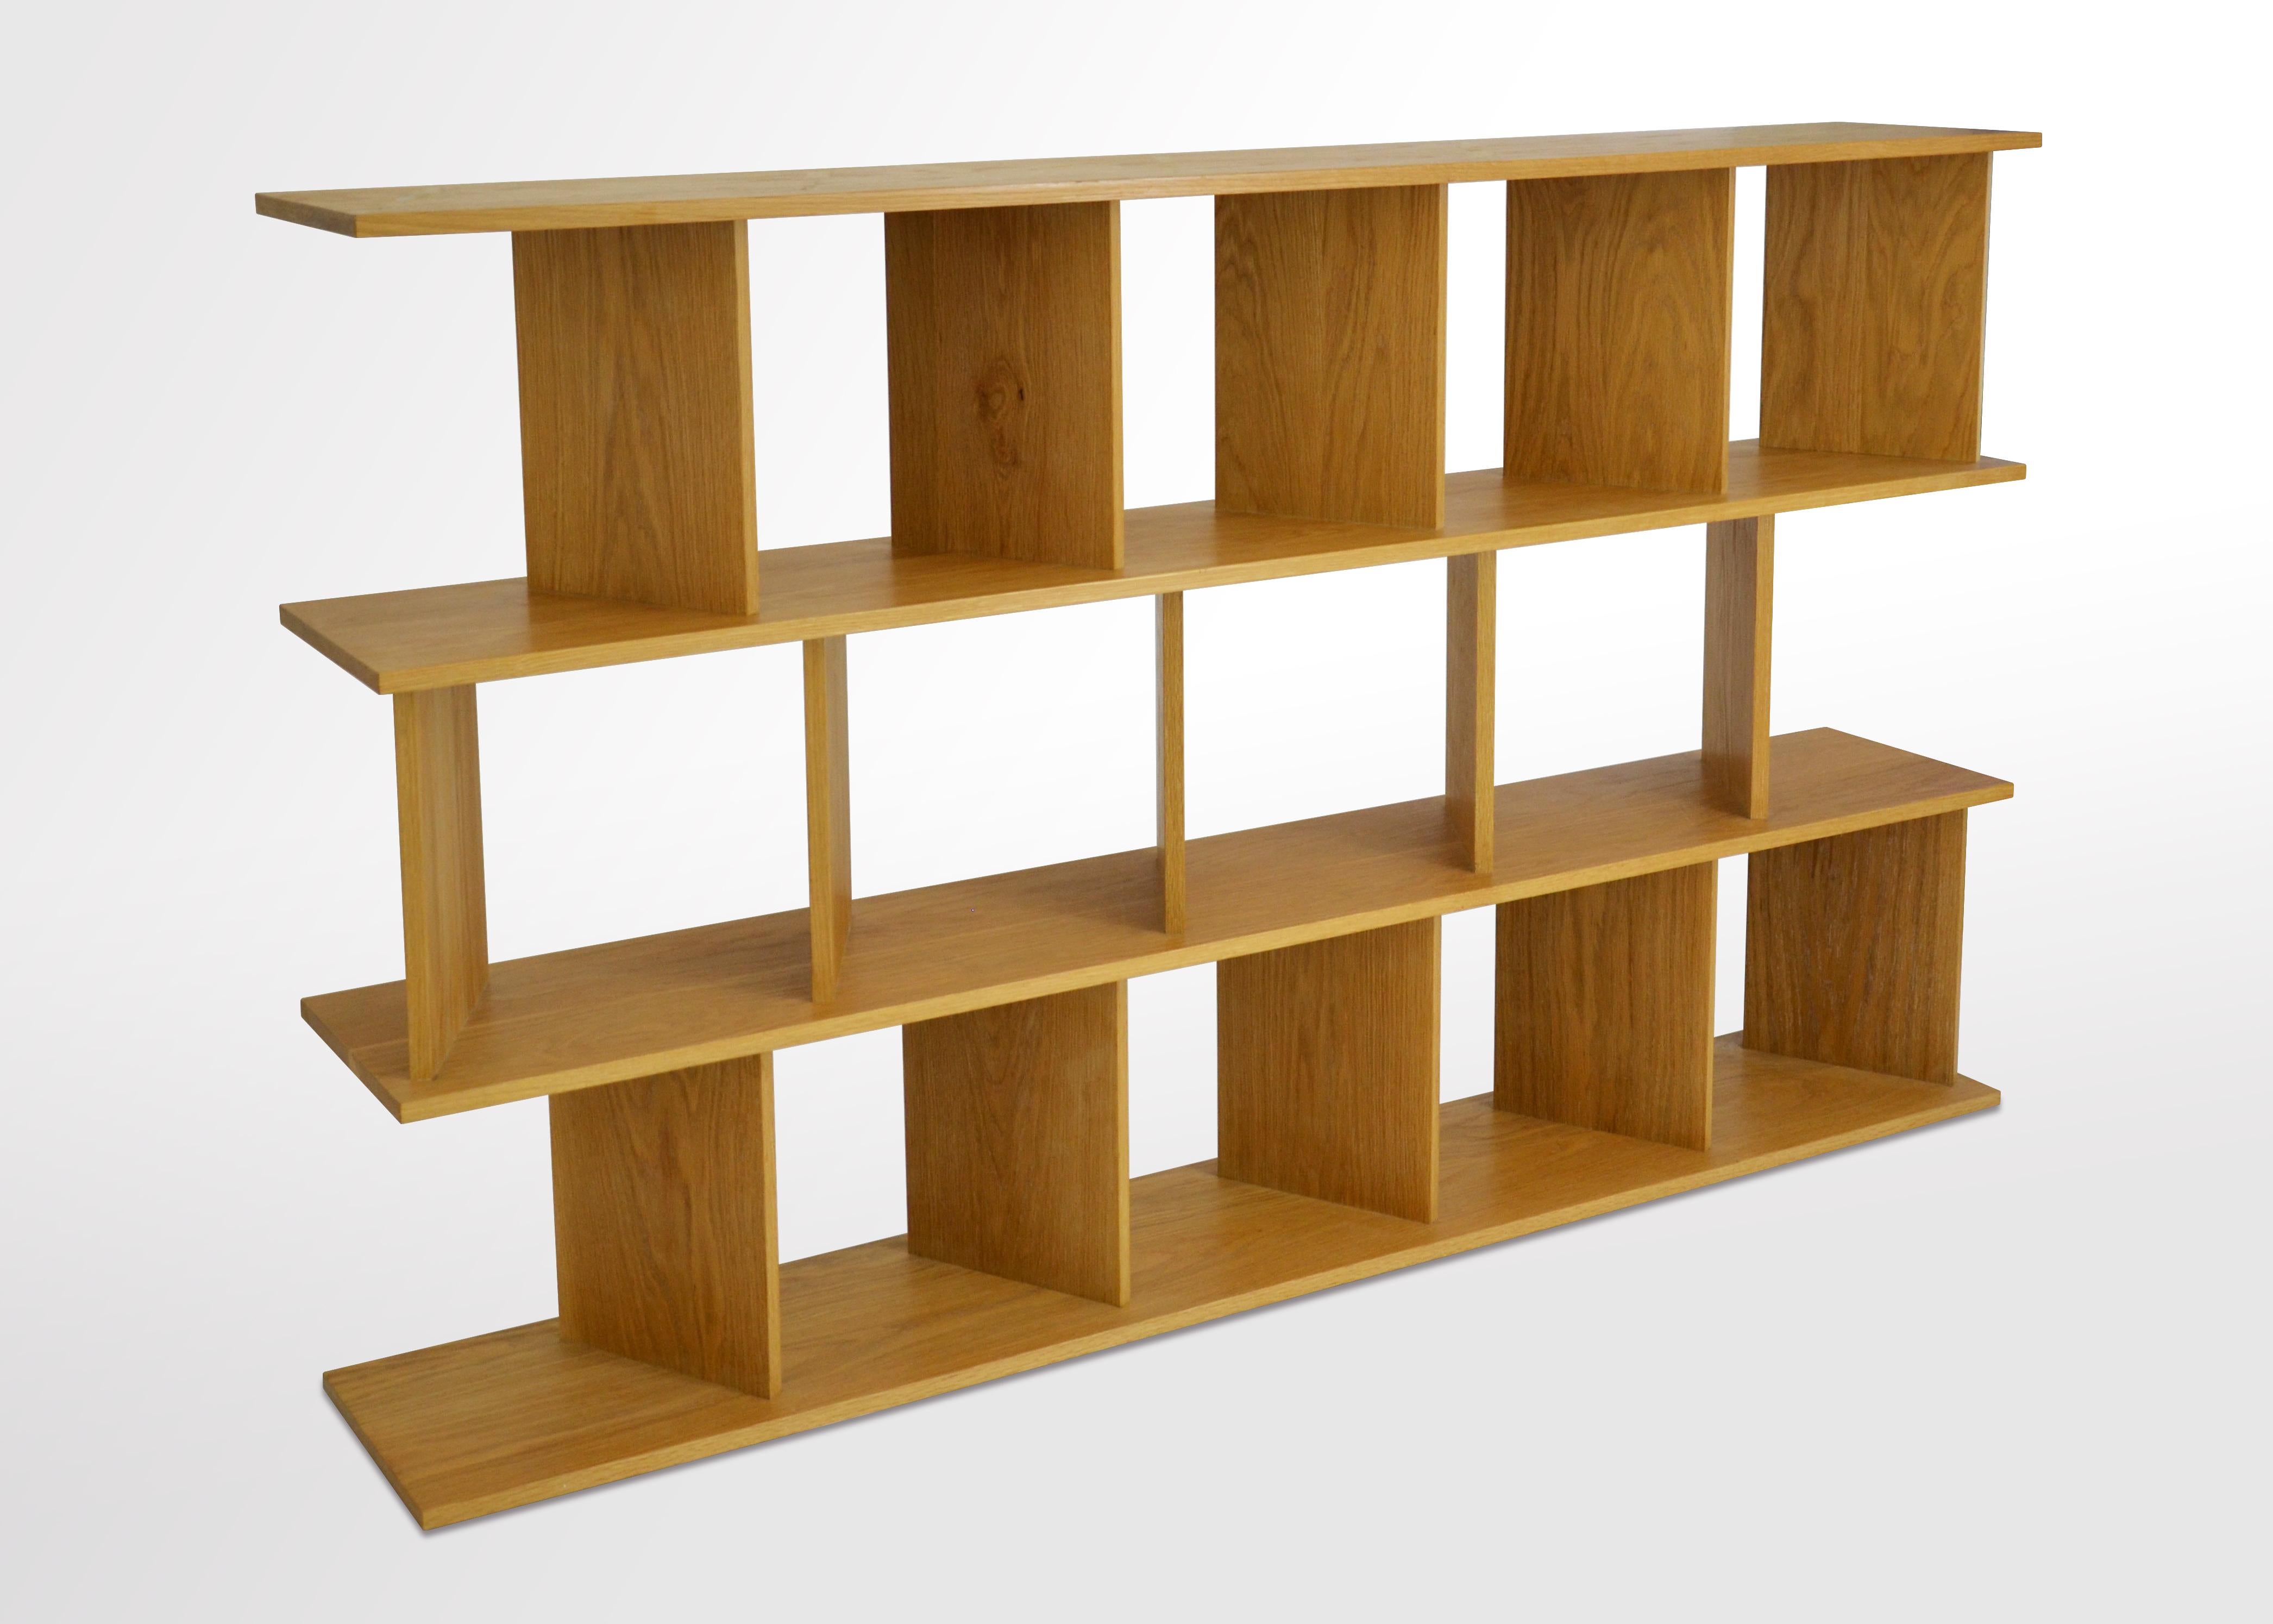 Part room divider, part bookcase, part screen, the 